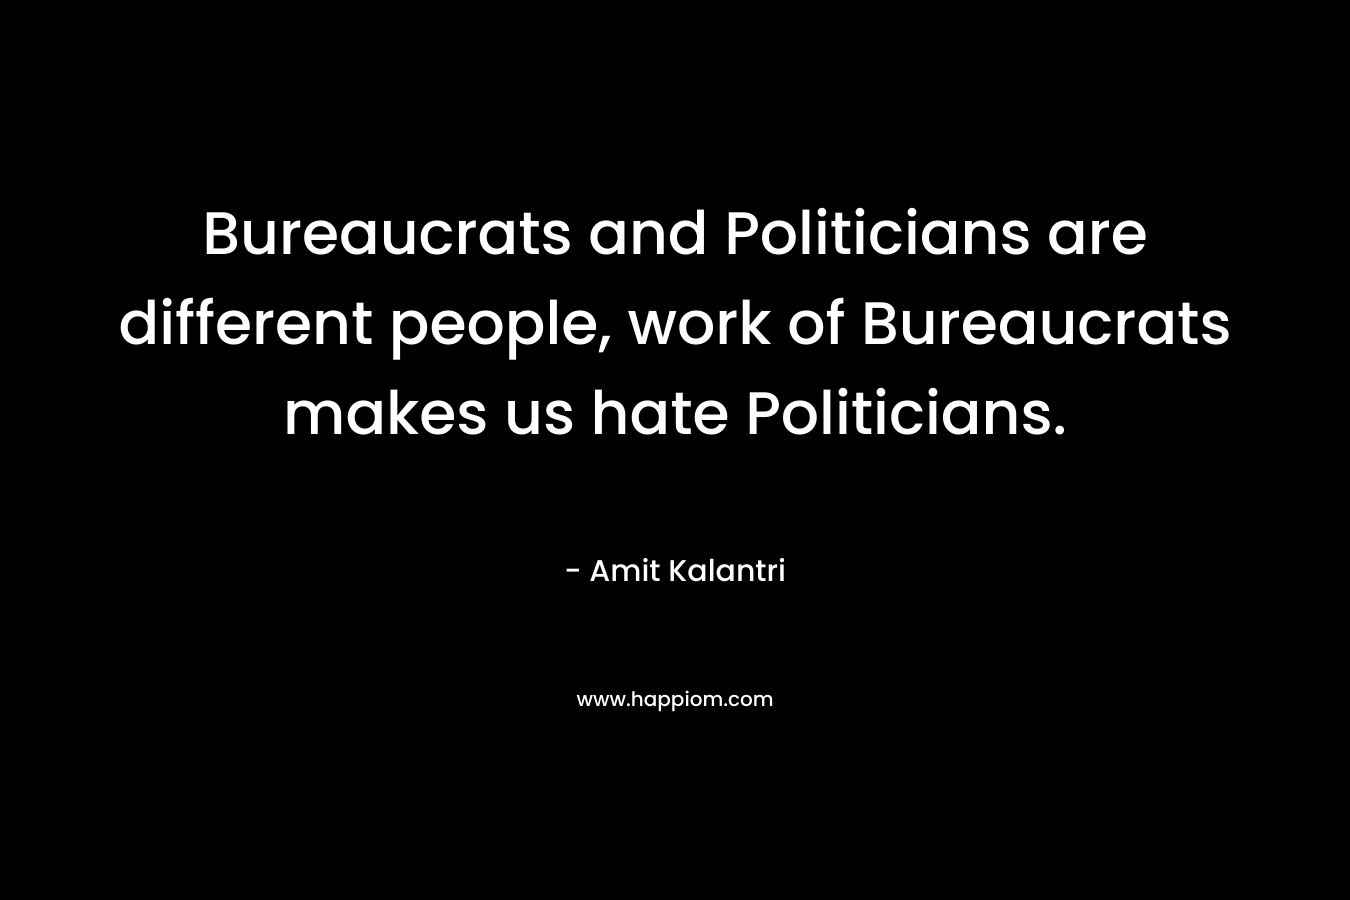 Bureaucrats and Politicians are different people, work of Bureaucrats makes us hate Politicians.